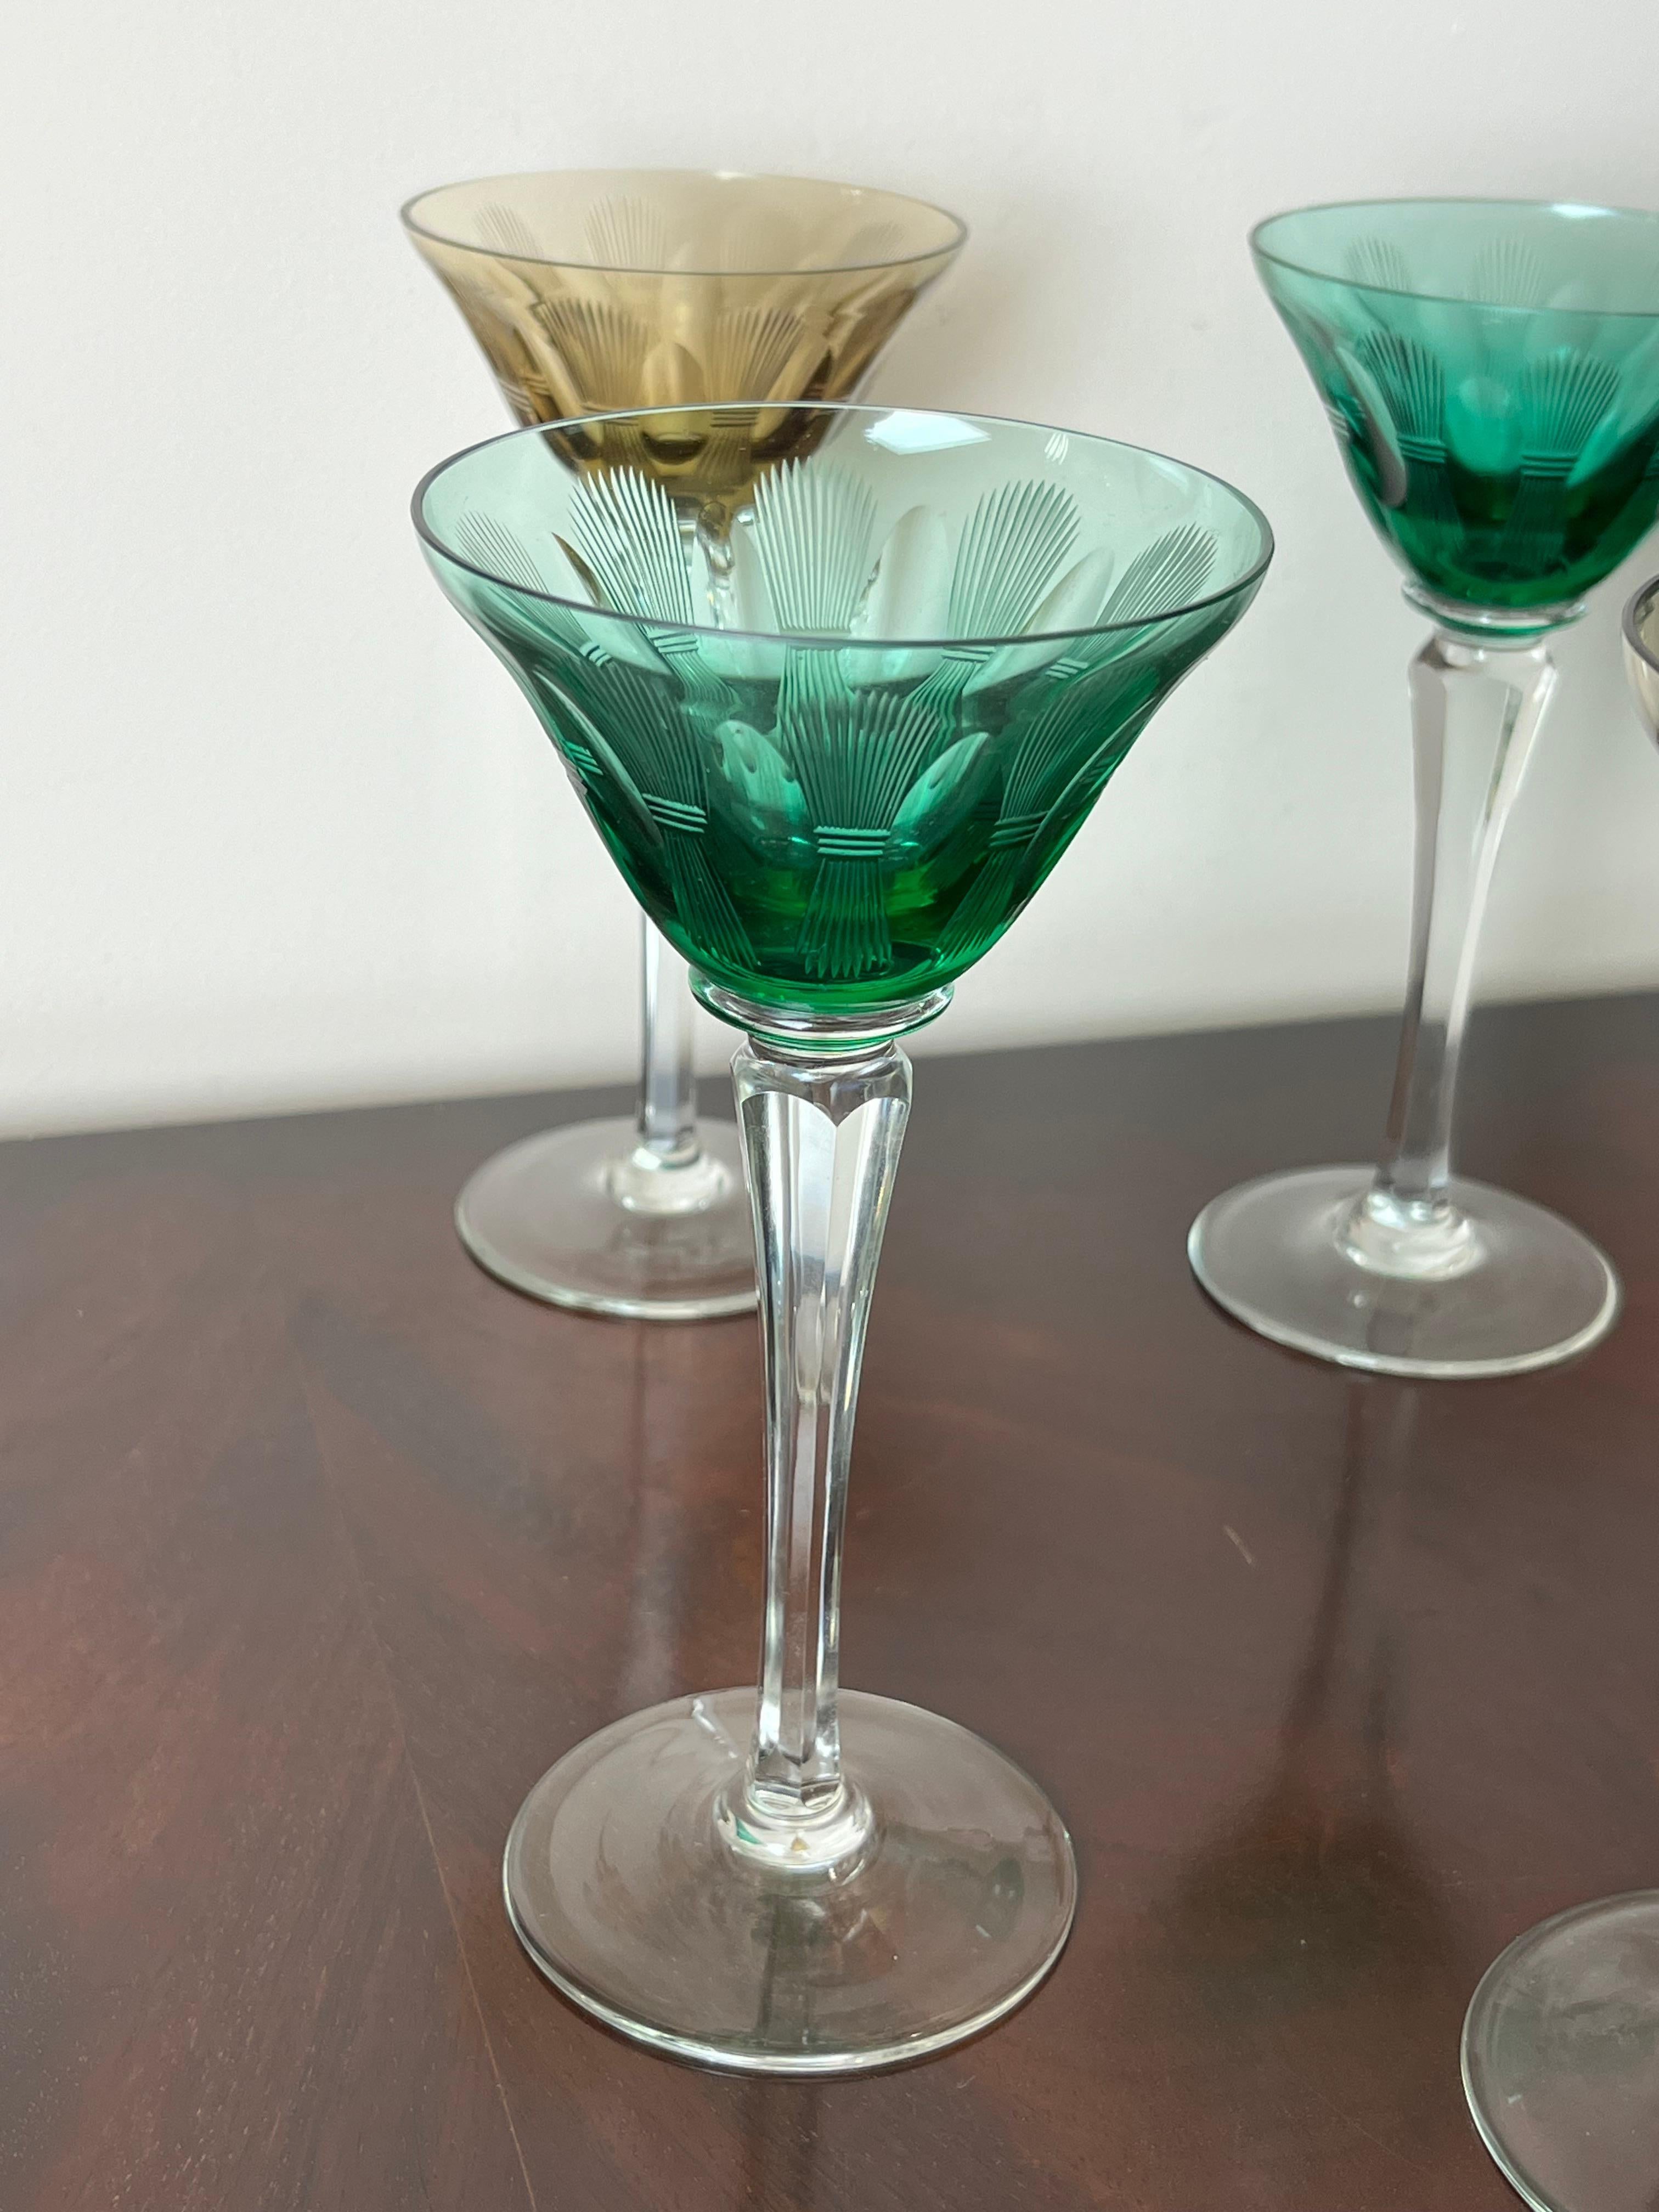 Mid-20th Century Set of 6 Colored Crystal Glasses, Italy, 1950s For Sale